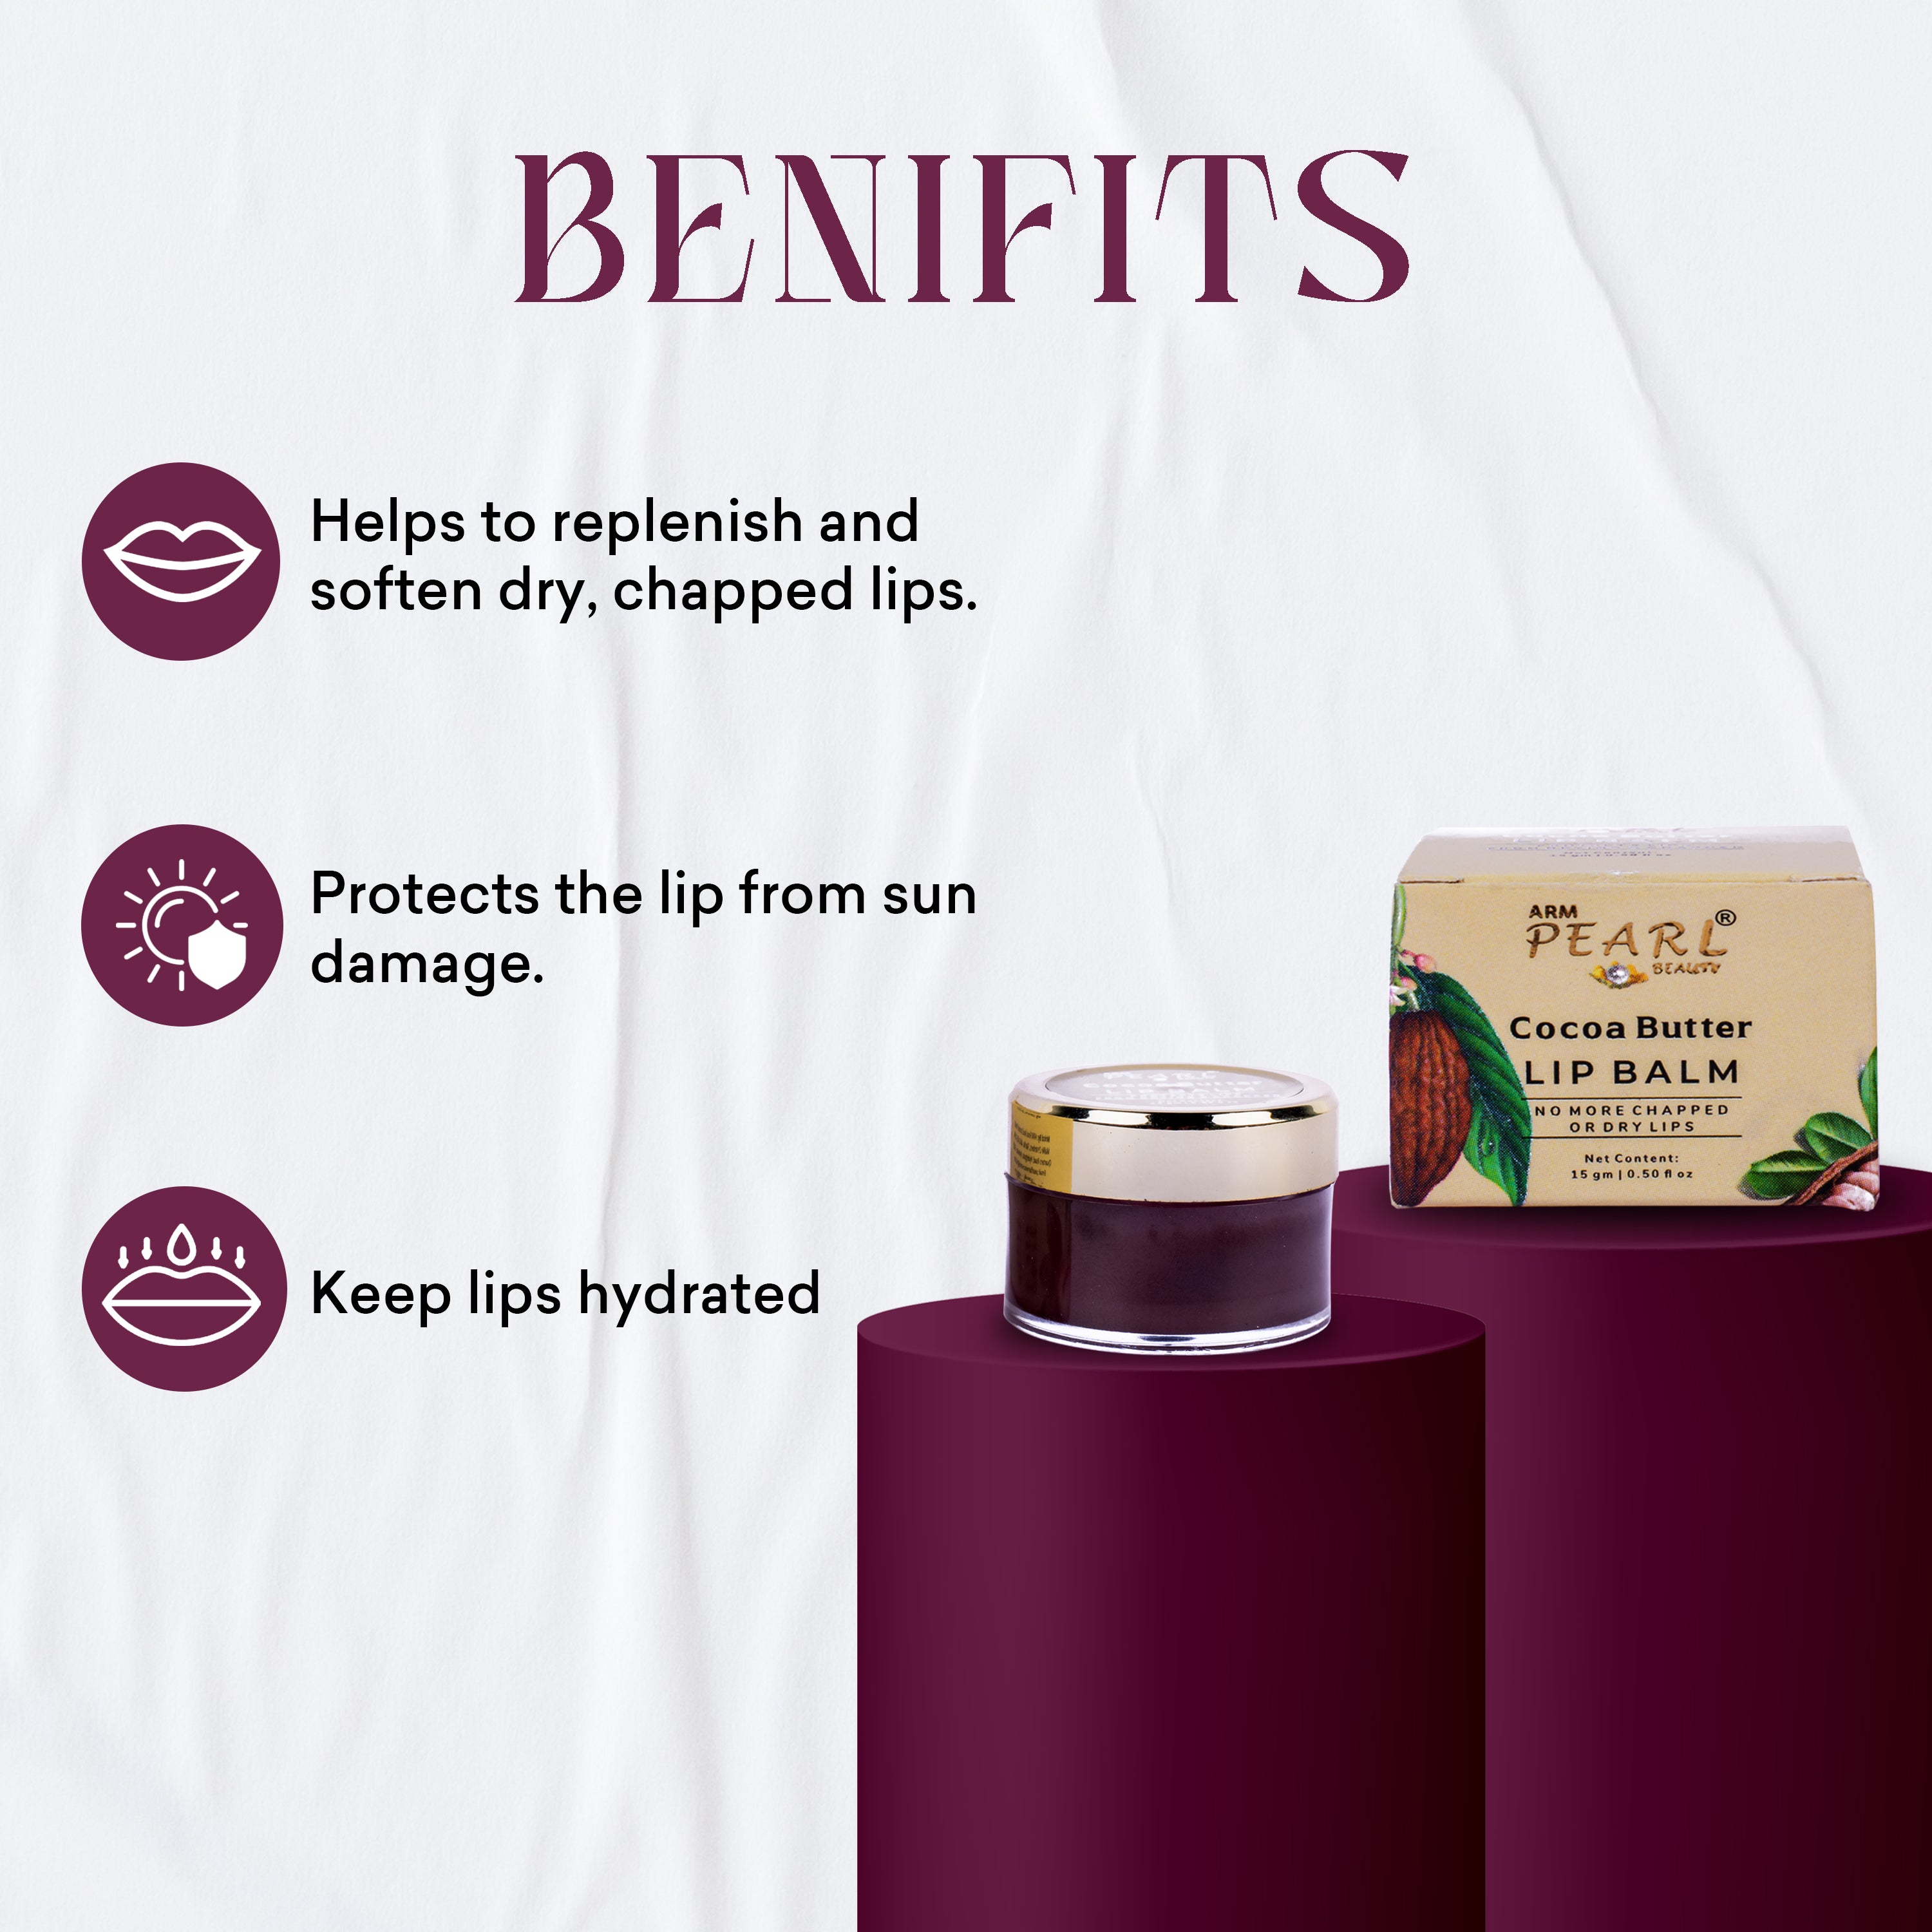 Benefits Of ARM Pearl Beauty Lip Balm Sun Protection